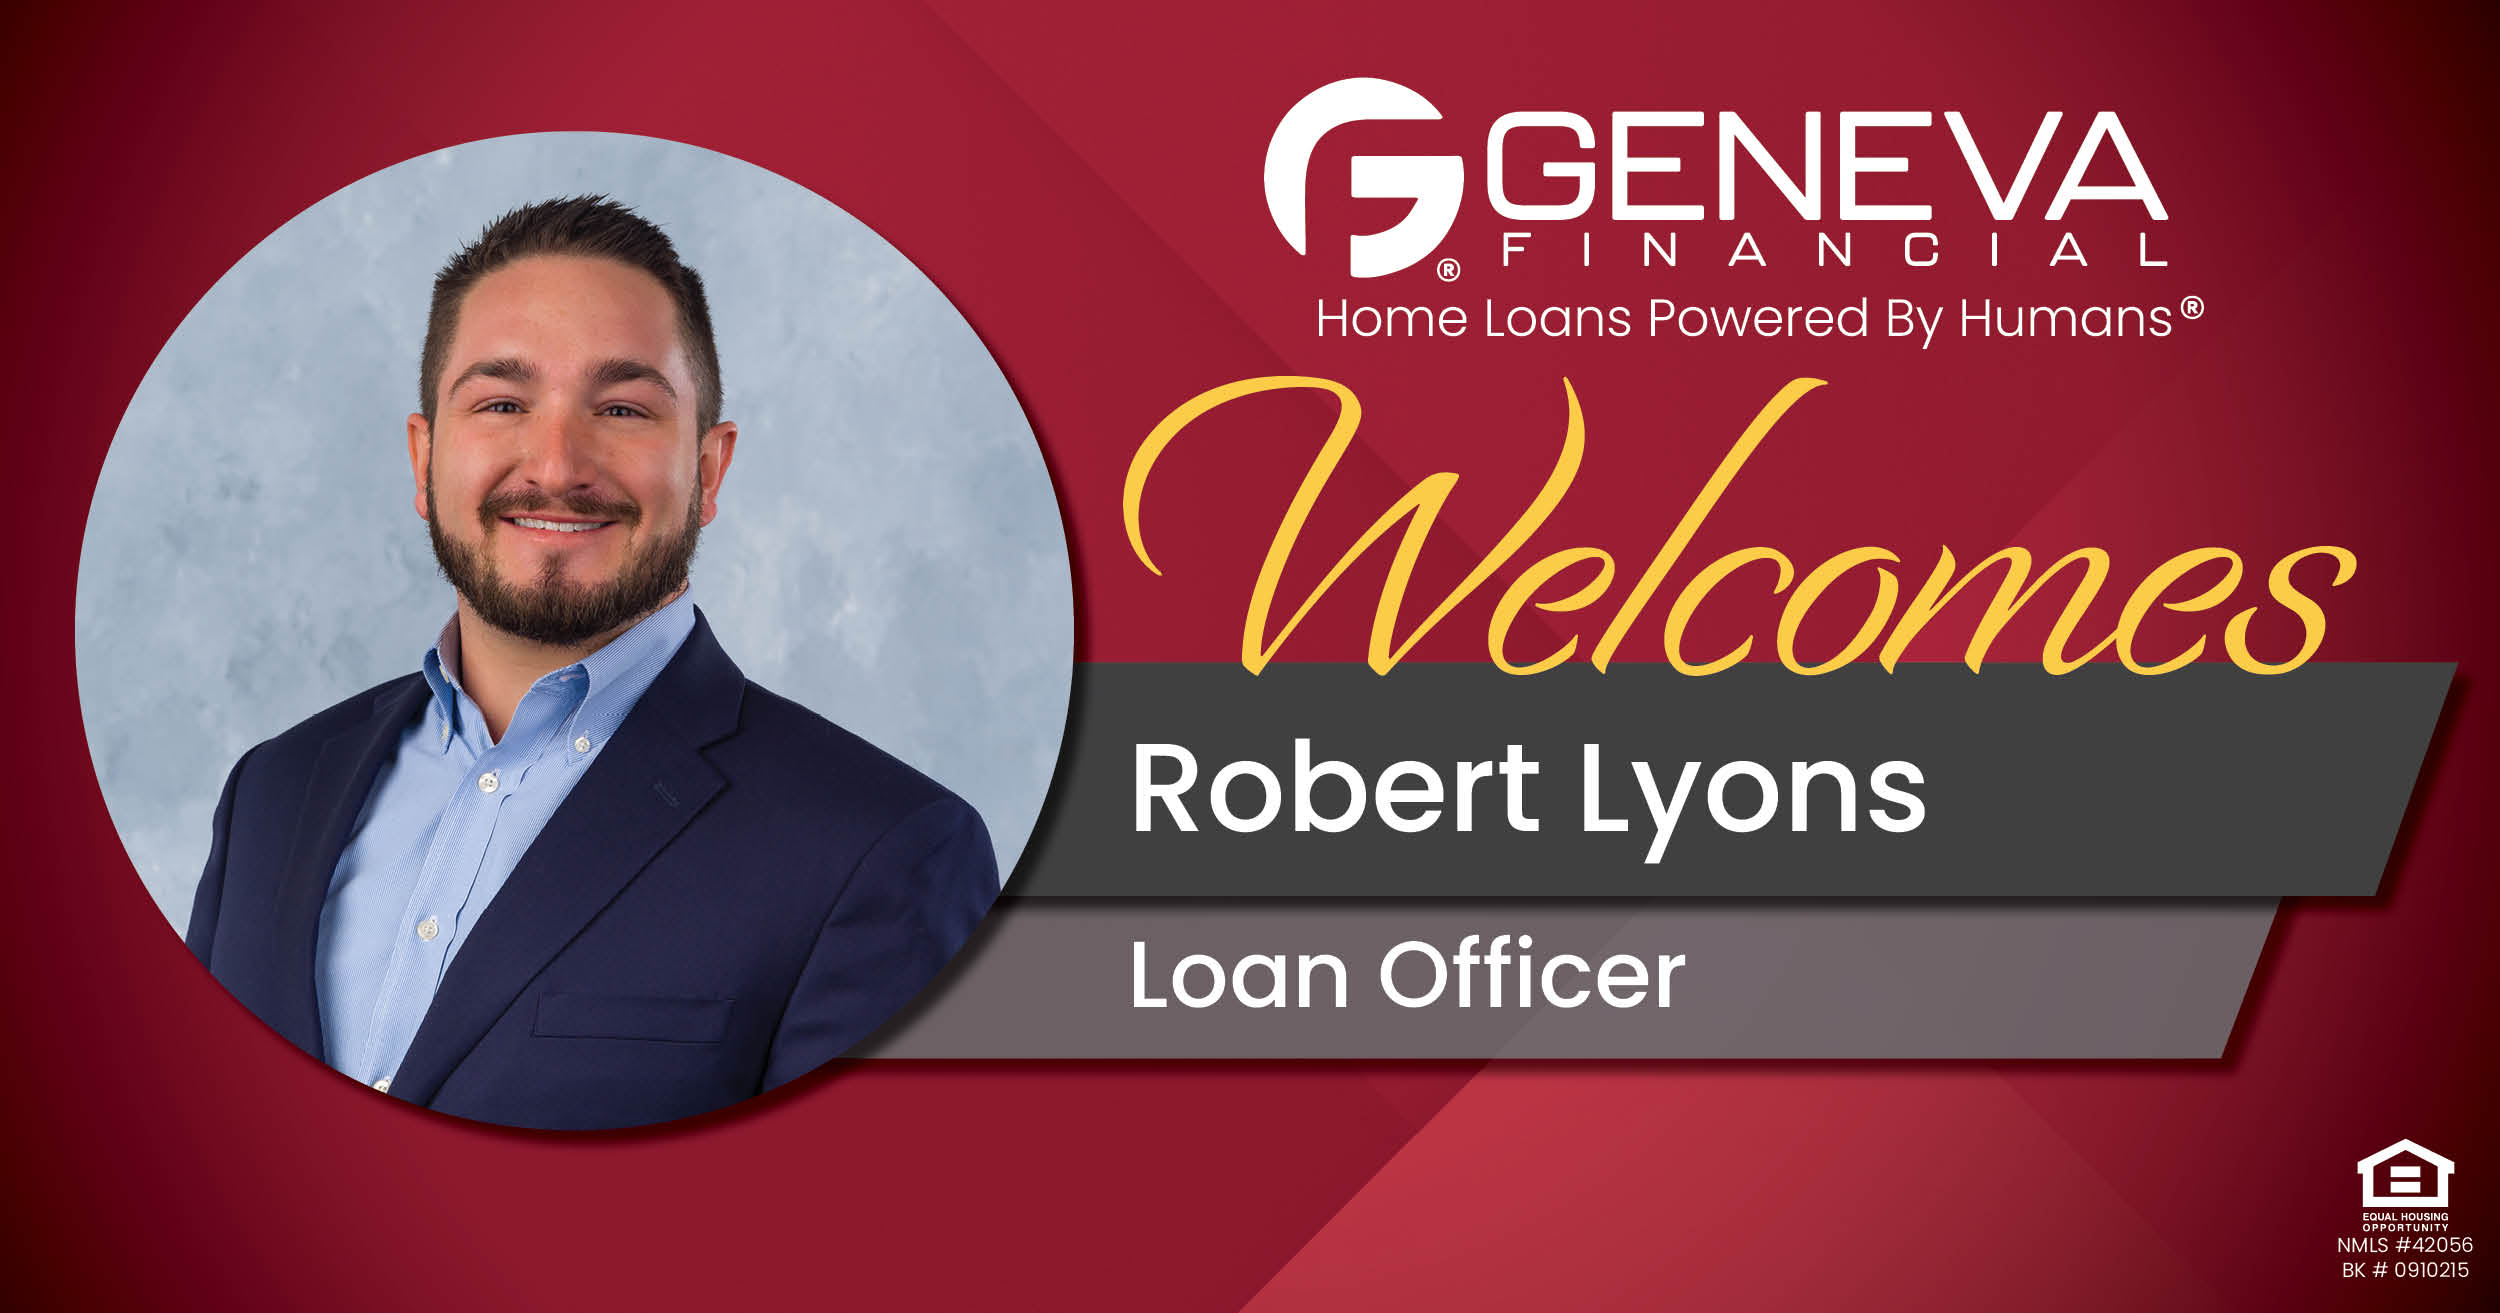 Geneva Financial Welcomes New Loan Officer Robert Lyons to Richmond, Virginia – Home Loans Powered by Humans®.